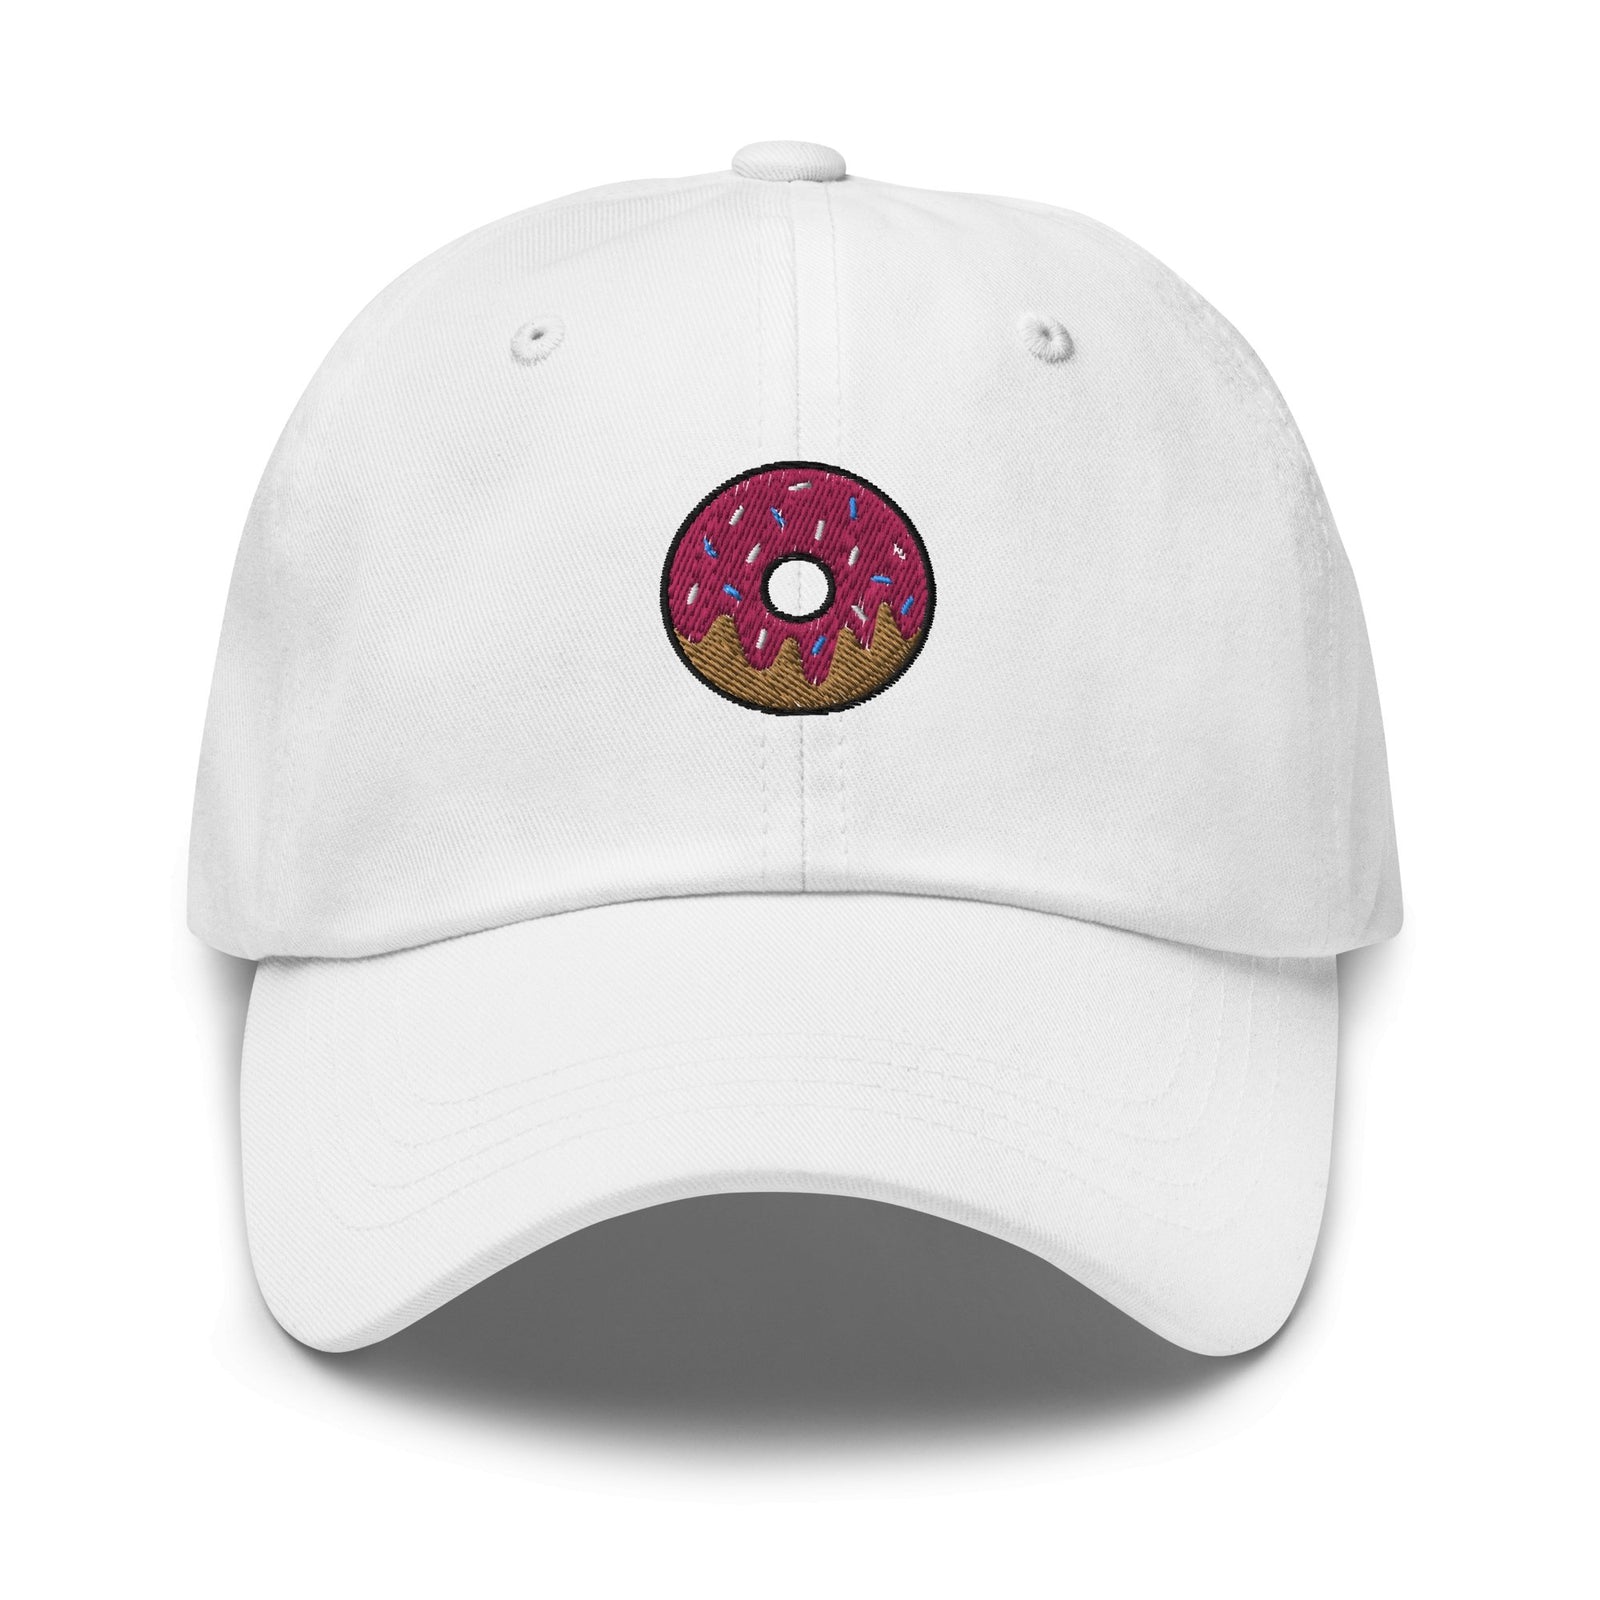 //cdn.shopify.com/s/files/1/0274/2488/2766/products/donut-dad-hat-351029_5000x.jpg?v=1652249597 5000w,
    //cdn.shopify.com/s/files/1/0274/2488/2766/products/donut-dad-hat-351029_4500x.jpg?v=1652249597 4500w,
    //cdn.shopify.com/s/files/1/0274/2488/2766/products/donut-dad-hat-351029_4000x.jpg?v=1652249597 4000w,
    //cdn.shopify.com/s/files/1/0274/2488/2766/products/donut-dad-hat-351029_3500x.jpg?v=1652249597 3500w,
    //cdn.shopify.com/s/files/1/0274/2488/2766/products/donut-dad-hat-351029_3000x.jpg?v=1652249597 3000w,
    //cdn.shopify.com/s/files/1/0274/2488/2766/products/donut-dad-hat-351029_2500x.jpg?v=1652249597 2500w,
    //cdn.shopify.com/s/files/1/0274/2488/2766/products/donut-dad-hat-351029_2000x.jpg?v=1652249597 2000w,
    //cdn.shopify.com/s/files/1/0274/2488/2766/products/donut-dad-hat-351029_1800x.jpg?v=1652249597 1800w,
    //cdn.shopify.com/s/files/1/0274/2488/2766/products/donut-dad-hat-351029_1600x.jpg?v=1652249597 1600w,
    //cdn.shopify.com/s/files/1/0274/2488/2766/products/donut-dad-hat-351029_1400x.jpg?v=1652249597 1400w,
    //cdn.shopify.com/s/files/1/0274/2488/2766/products/donut-dad-hat-351029_1200x.jpg?v=1652249597 1200w,
    //cdn.shopify.com/s/files/1/0274/2488/2766/products/donut-dad-hat-351029_1000x.jpg?v=1652249597 1000w,
    //cdn.shopify.com/s/files/1/0274/2488/2766/products/donut-dad-hat-351029_800x.jpg?v=1652249597 800w,
    //cdn.shopify.com/s/files/1/0274/2488/2766/products/donut-dad-hat-351029_600x.jpg?v=1652249597 600w,
    //cdn.shopify.com/s/files/1/0274/2488/2766/products/donut-dad-hat-351029_400x.jpg?v=1652249597 400w,
    //cdn.shopify.com/s/files/1/0274/2488/2766/products/donut-dad-hat-351029_200x.jpg?v=1652249597 200w